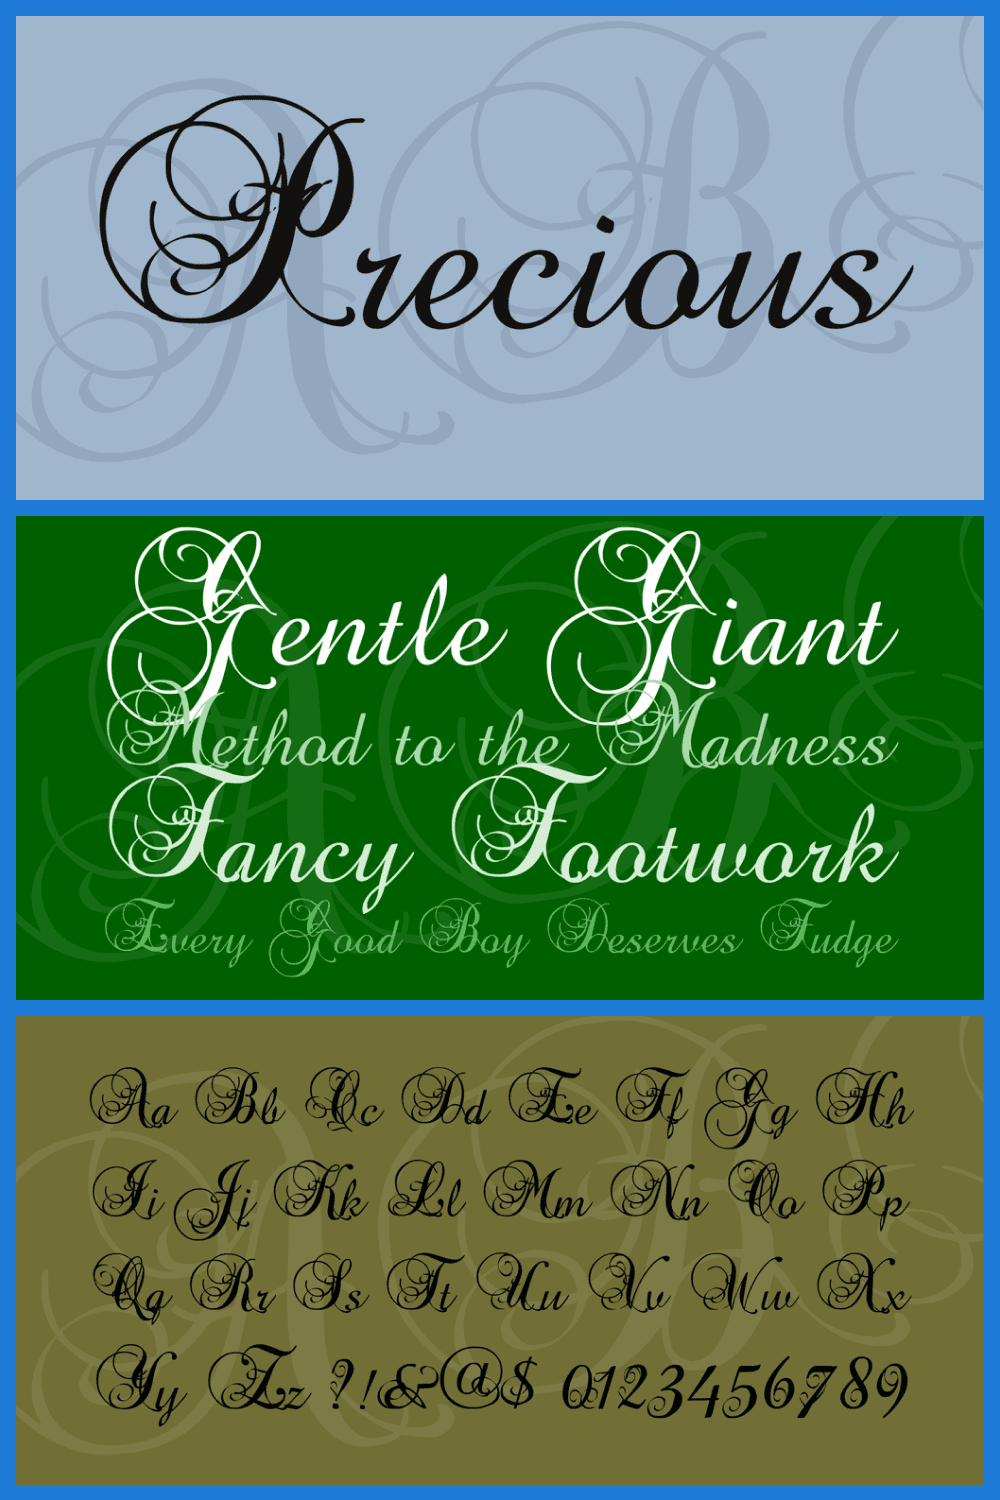 A fabulous font that would be a great choice for romantic stories.